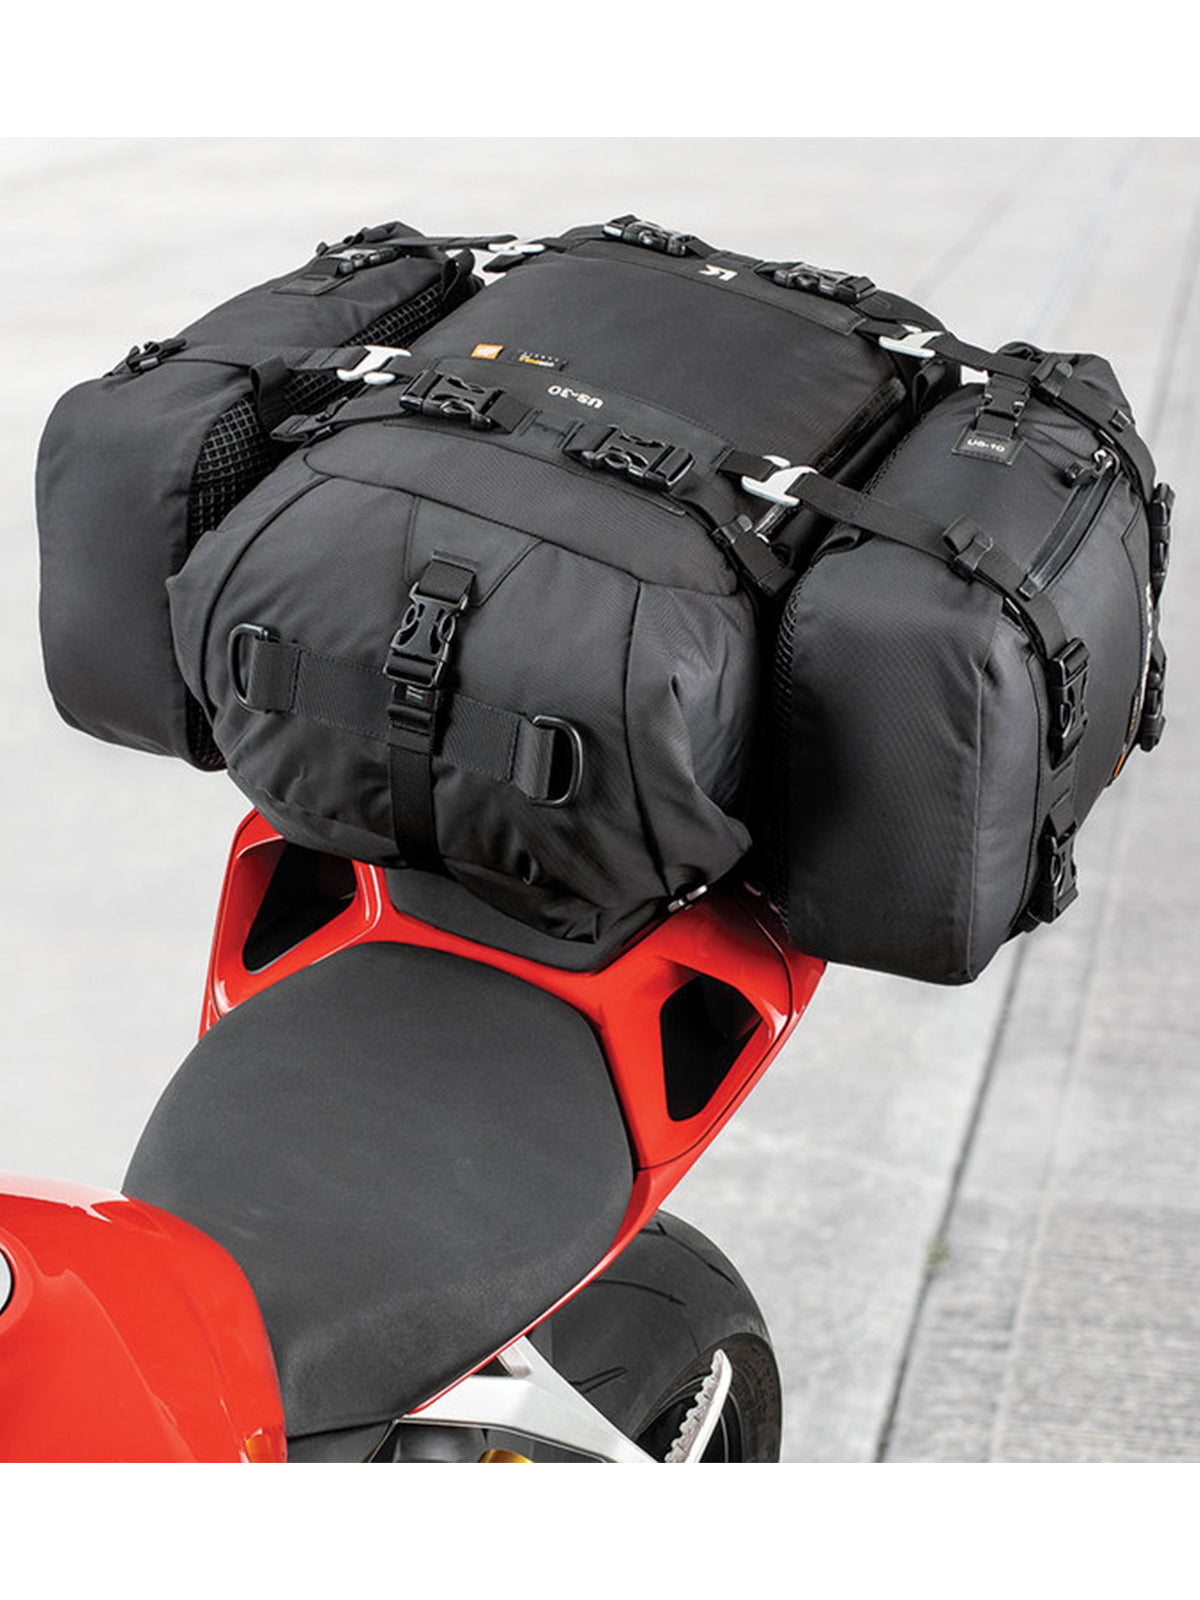 Kriega US30 Drypack combo with other adventure packs